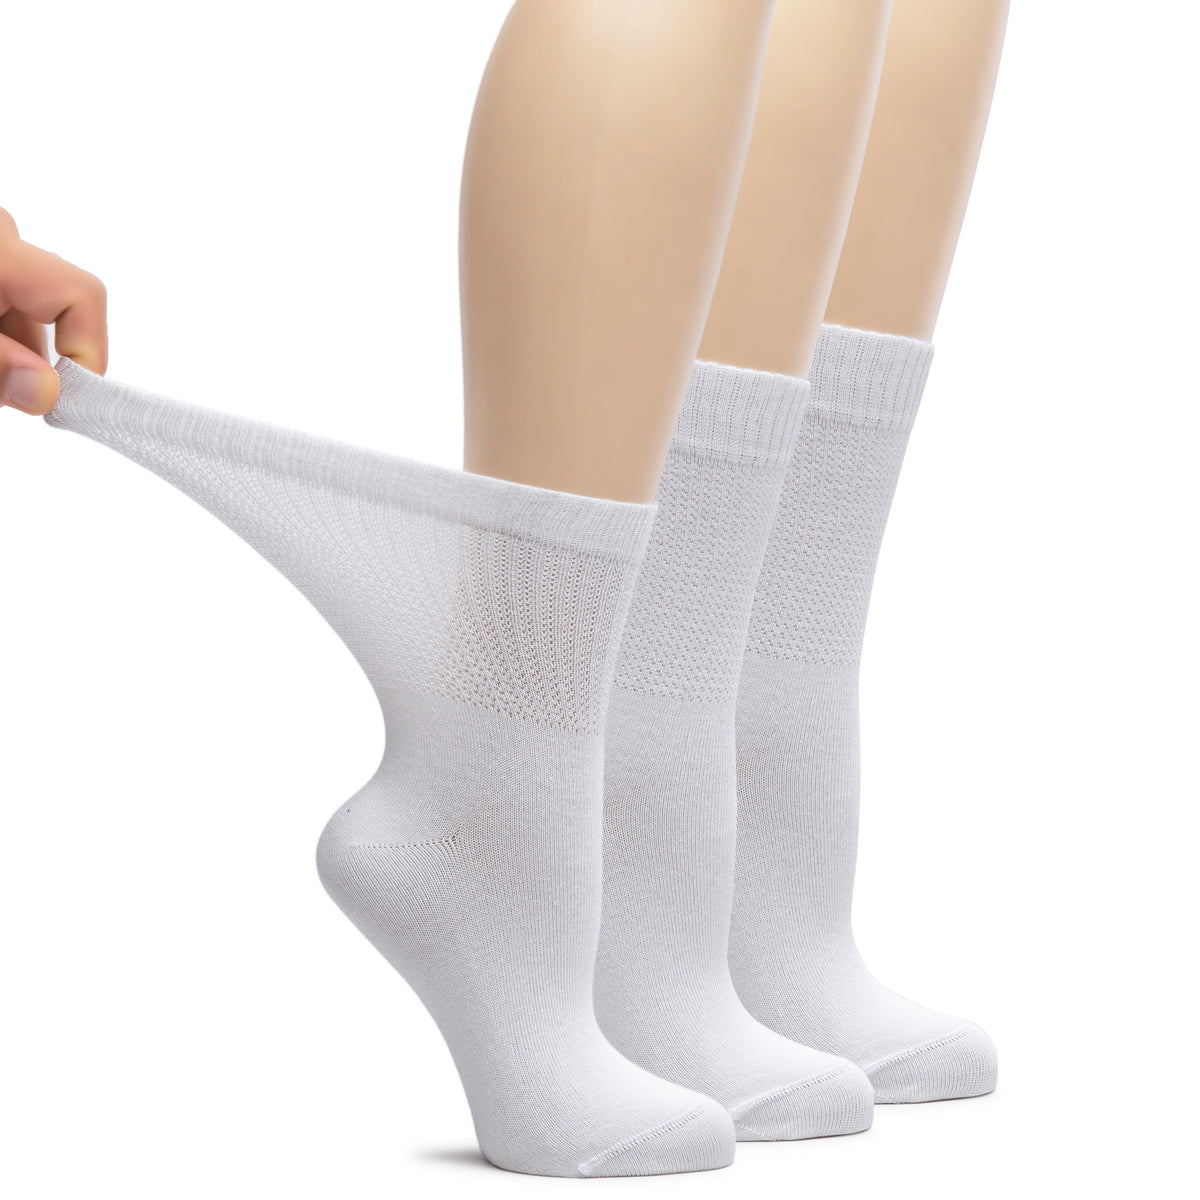 These Bamboo Diabetic Crew Socks are showcased on a mannequin, featuring three pairs of white socks for ultimate comfort and support.